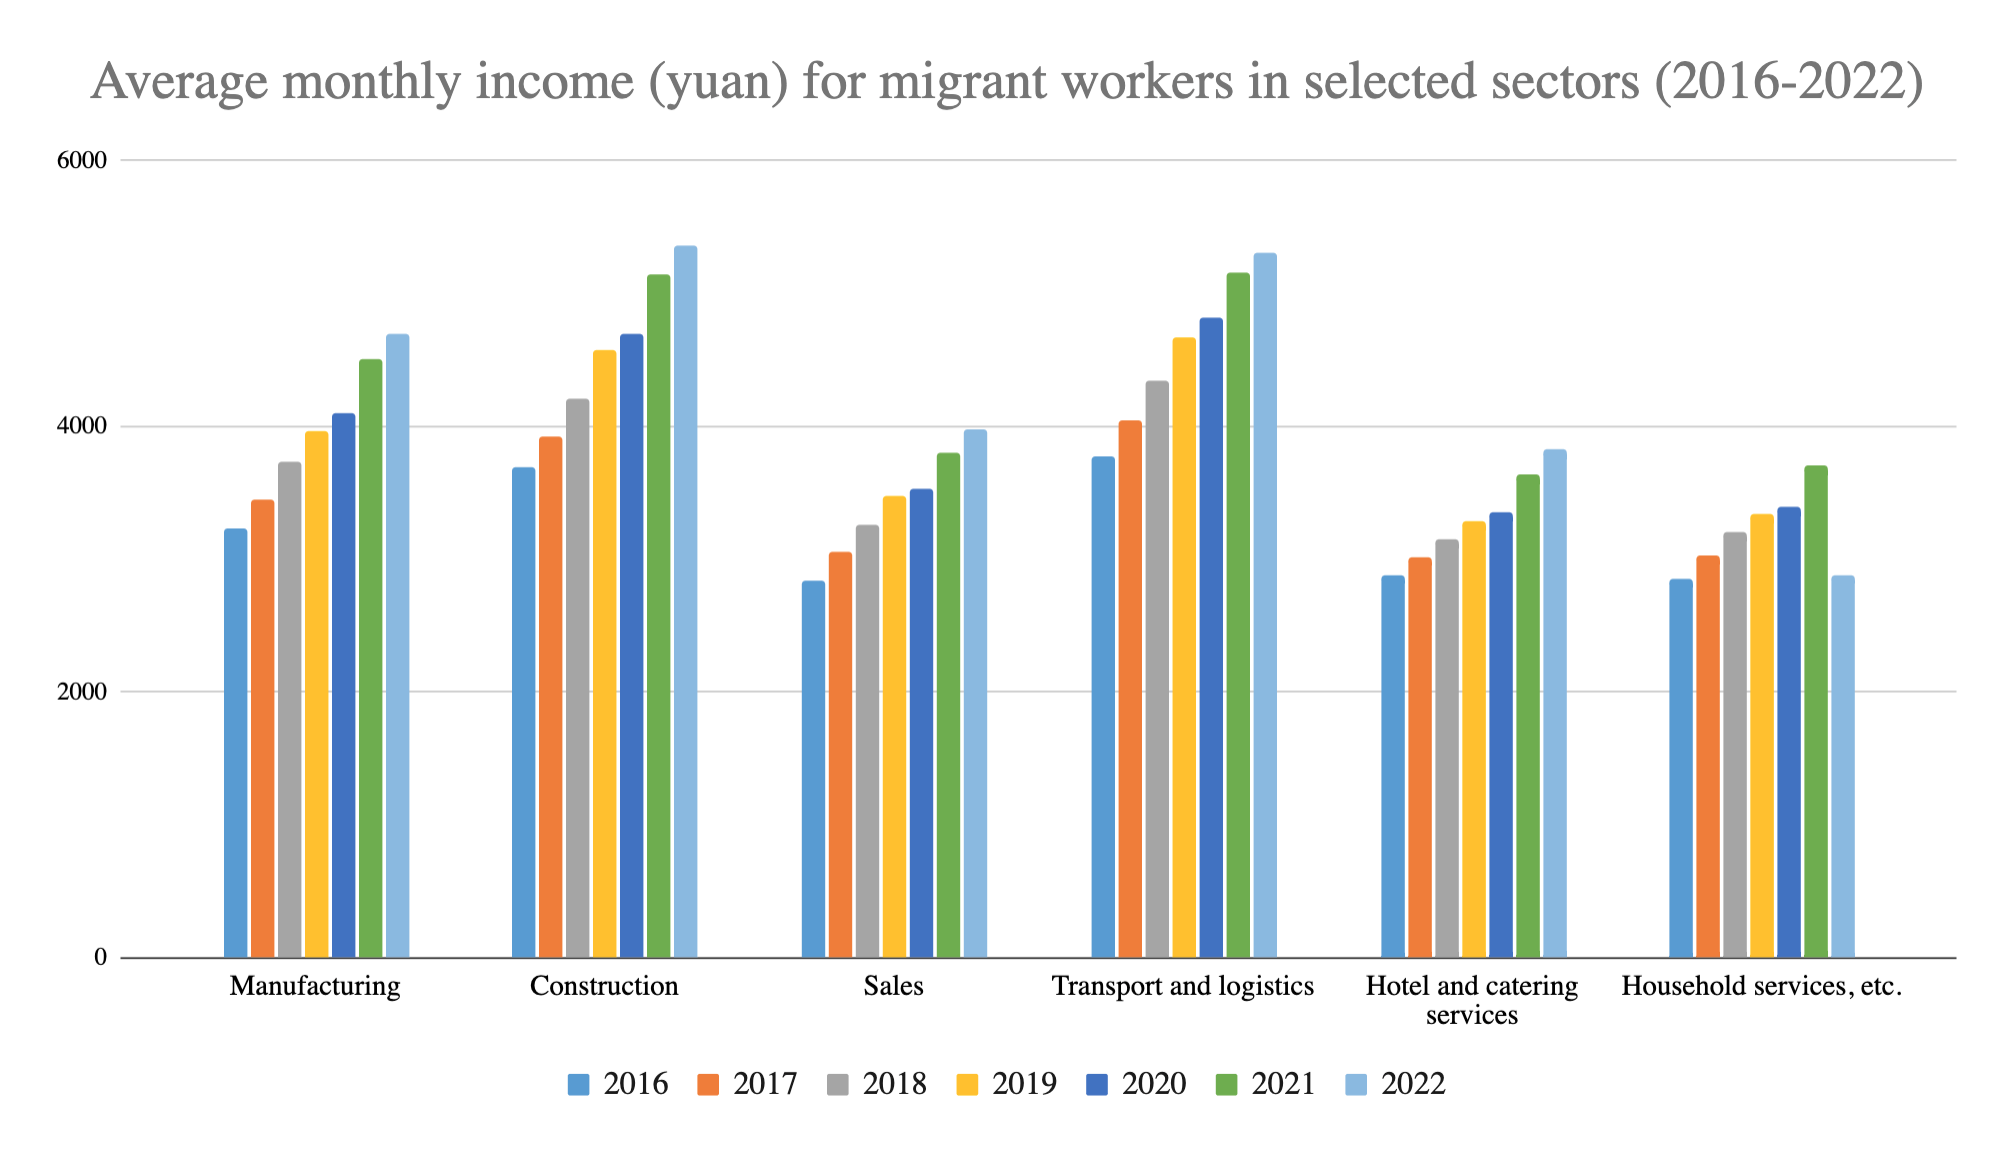 A CLB chart shows the average wages for migrant workers in various industries from 2016 to 2022 according to official sources